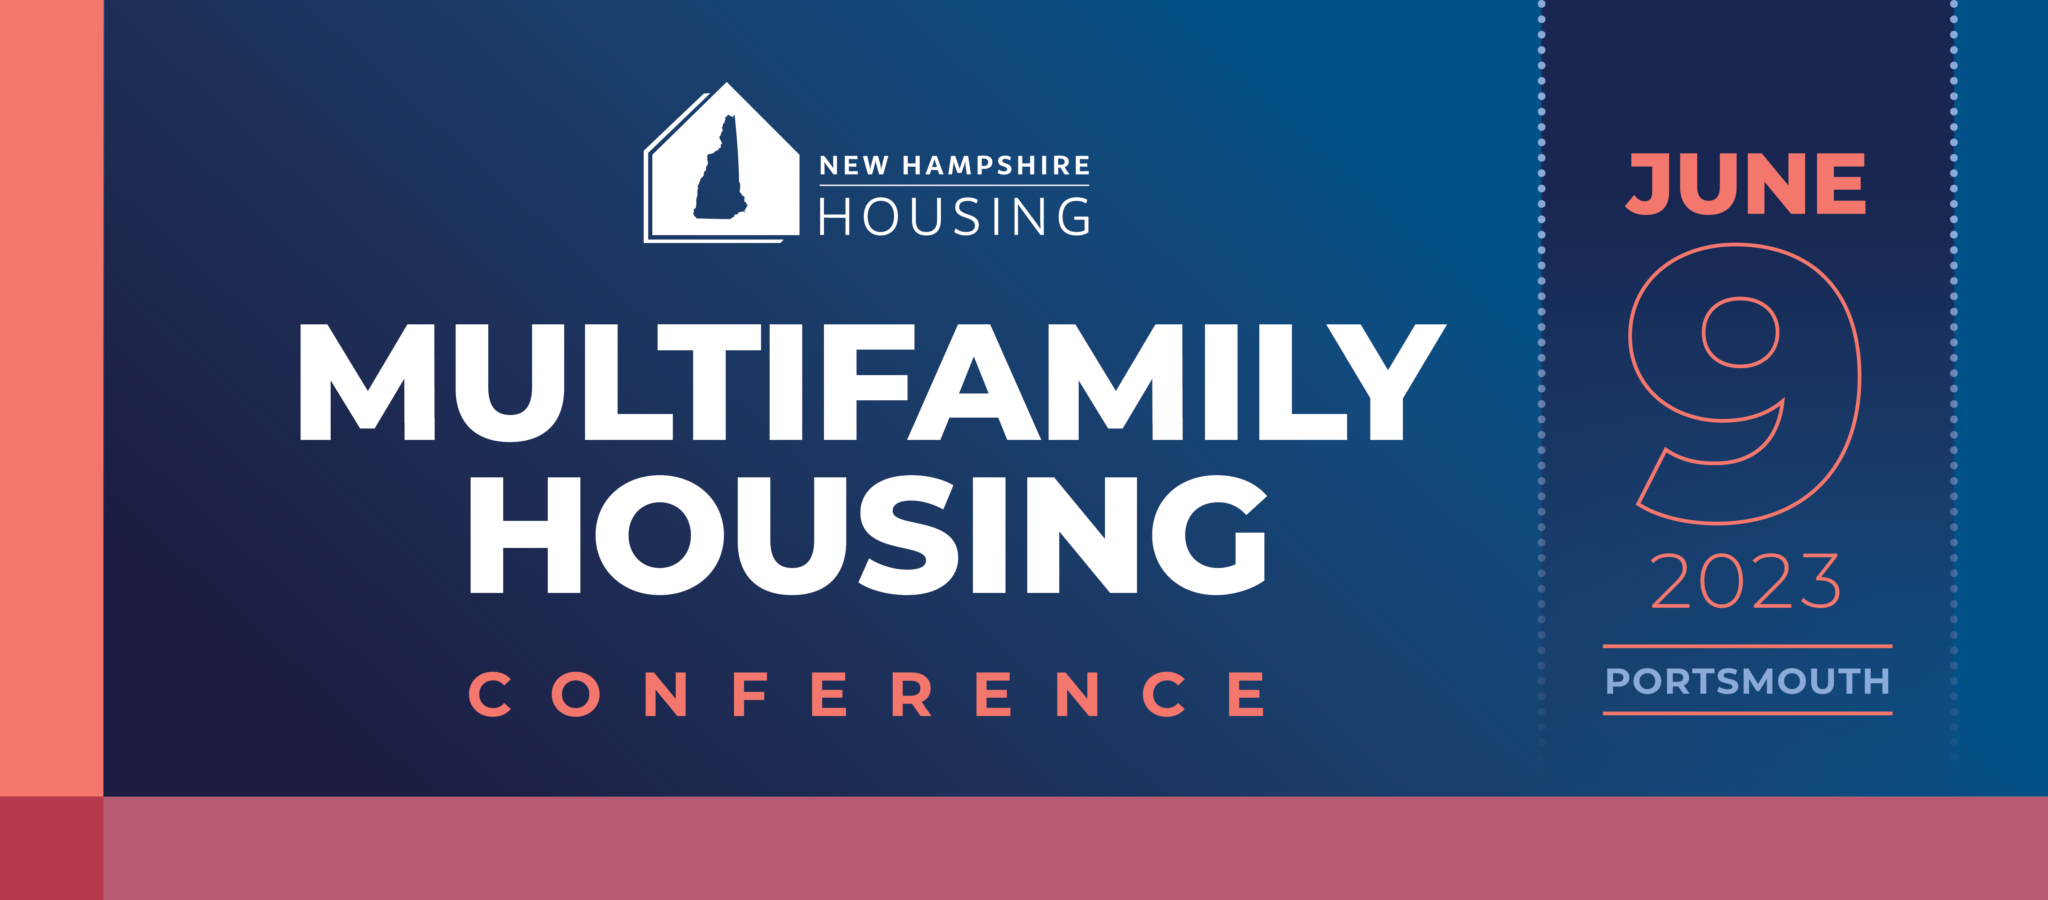 2023 NH Housing Multifamily Housing Conference 6/9/23 Portsmouth